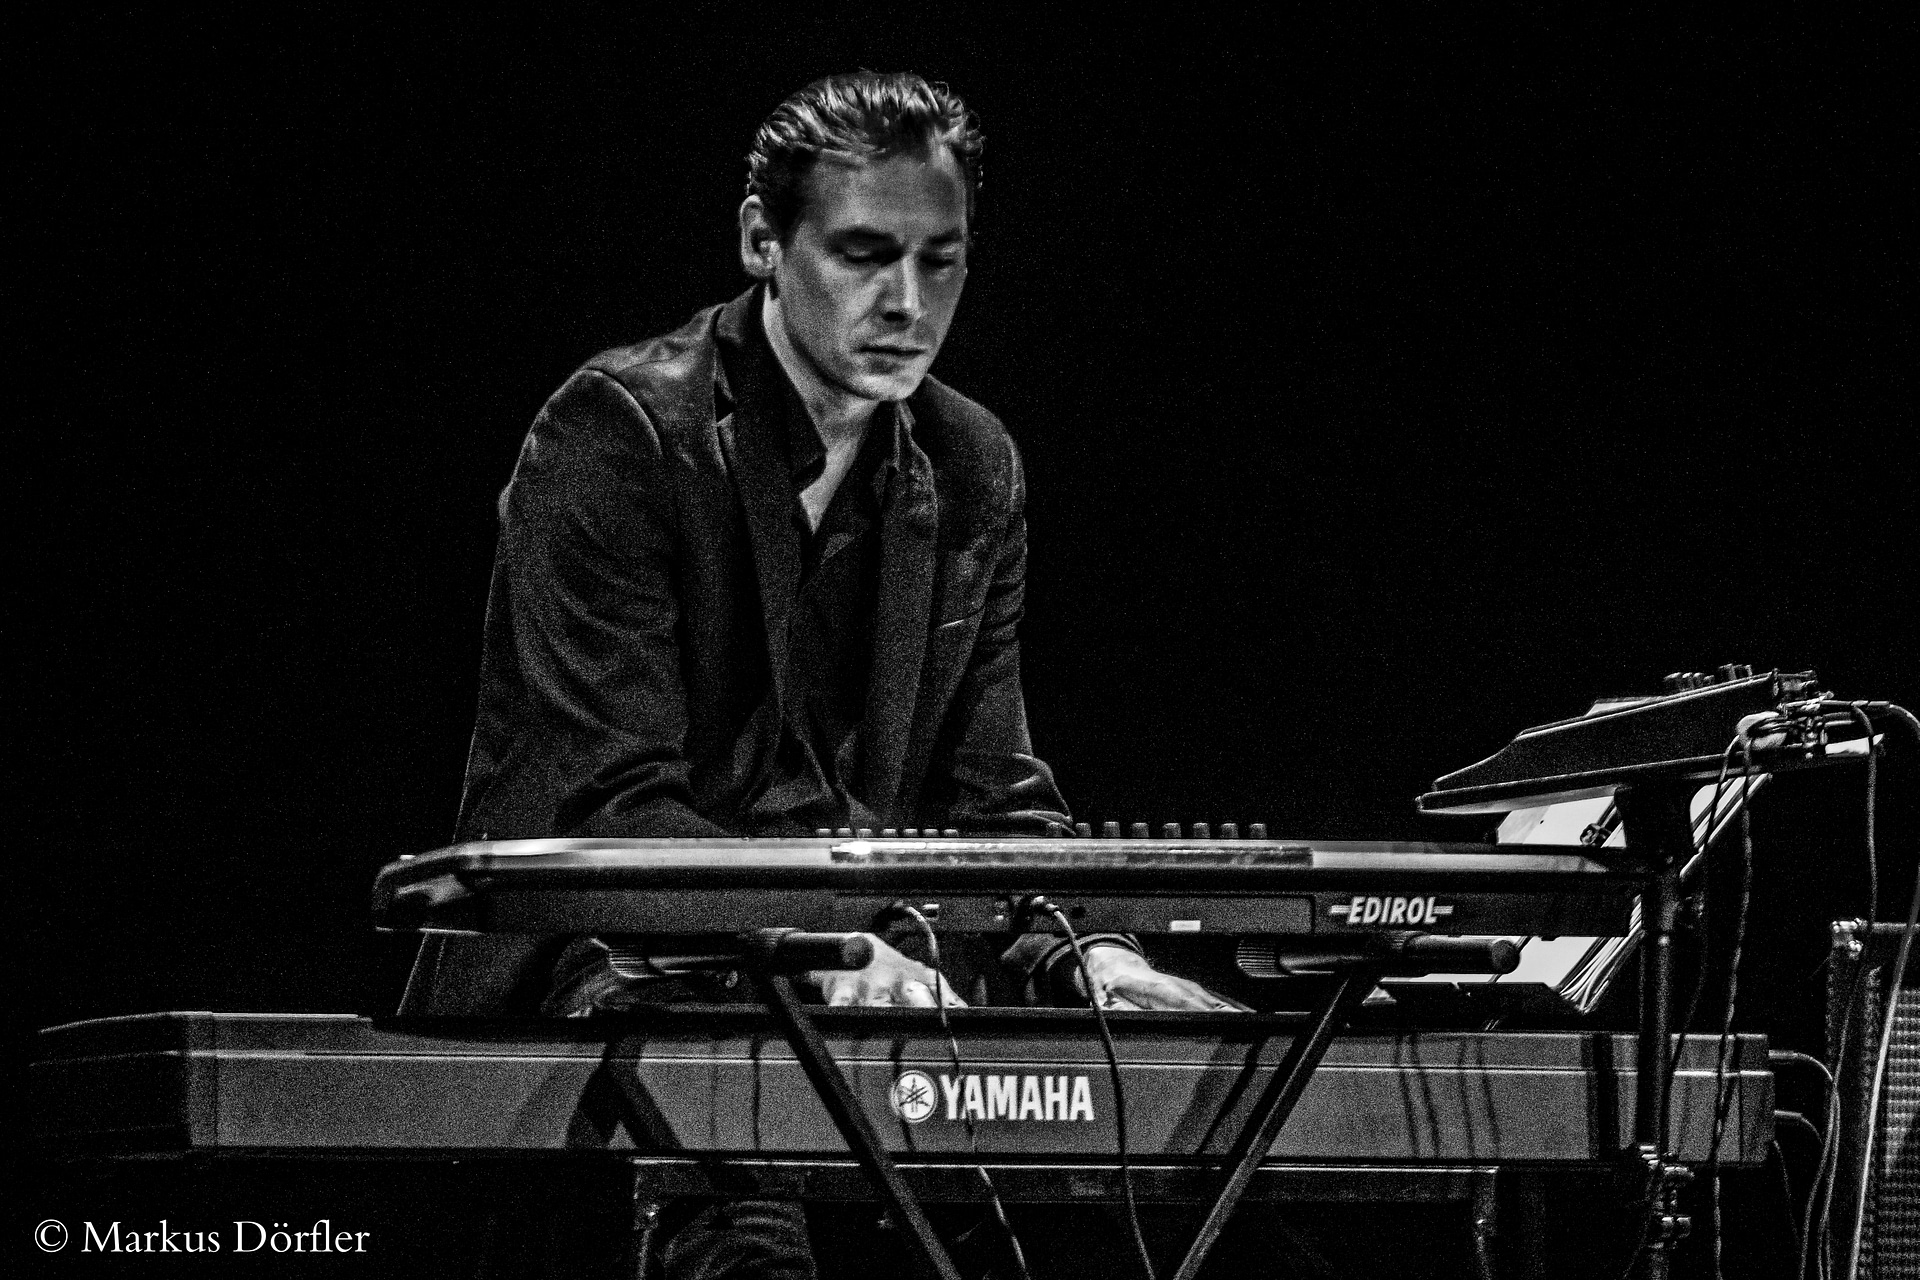 Mike Strauss – Andrea Schroeder concert at Theater Akzent, Vienna 
©2014 Photography by Markus Dörfler. All rights reserved.